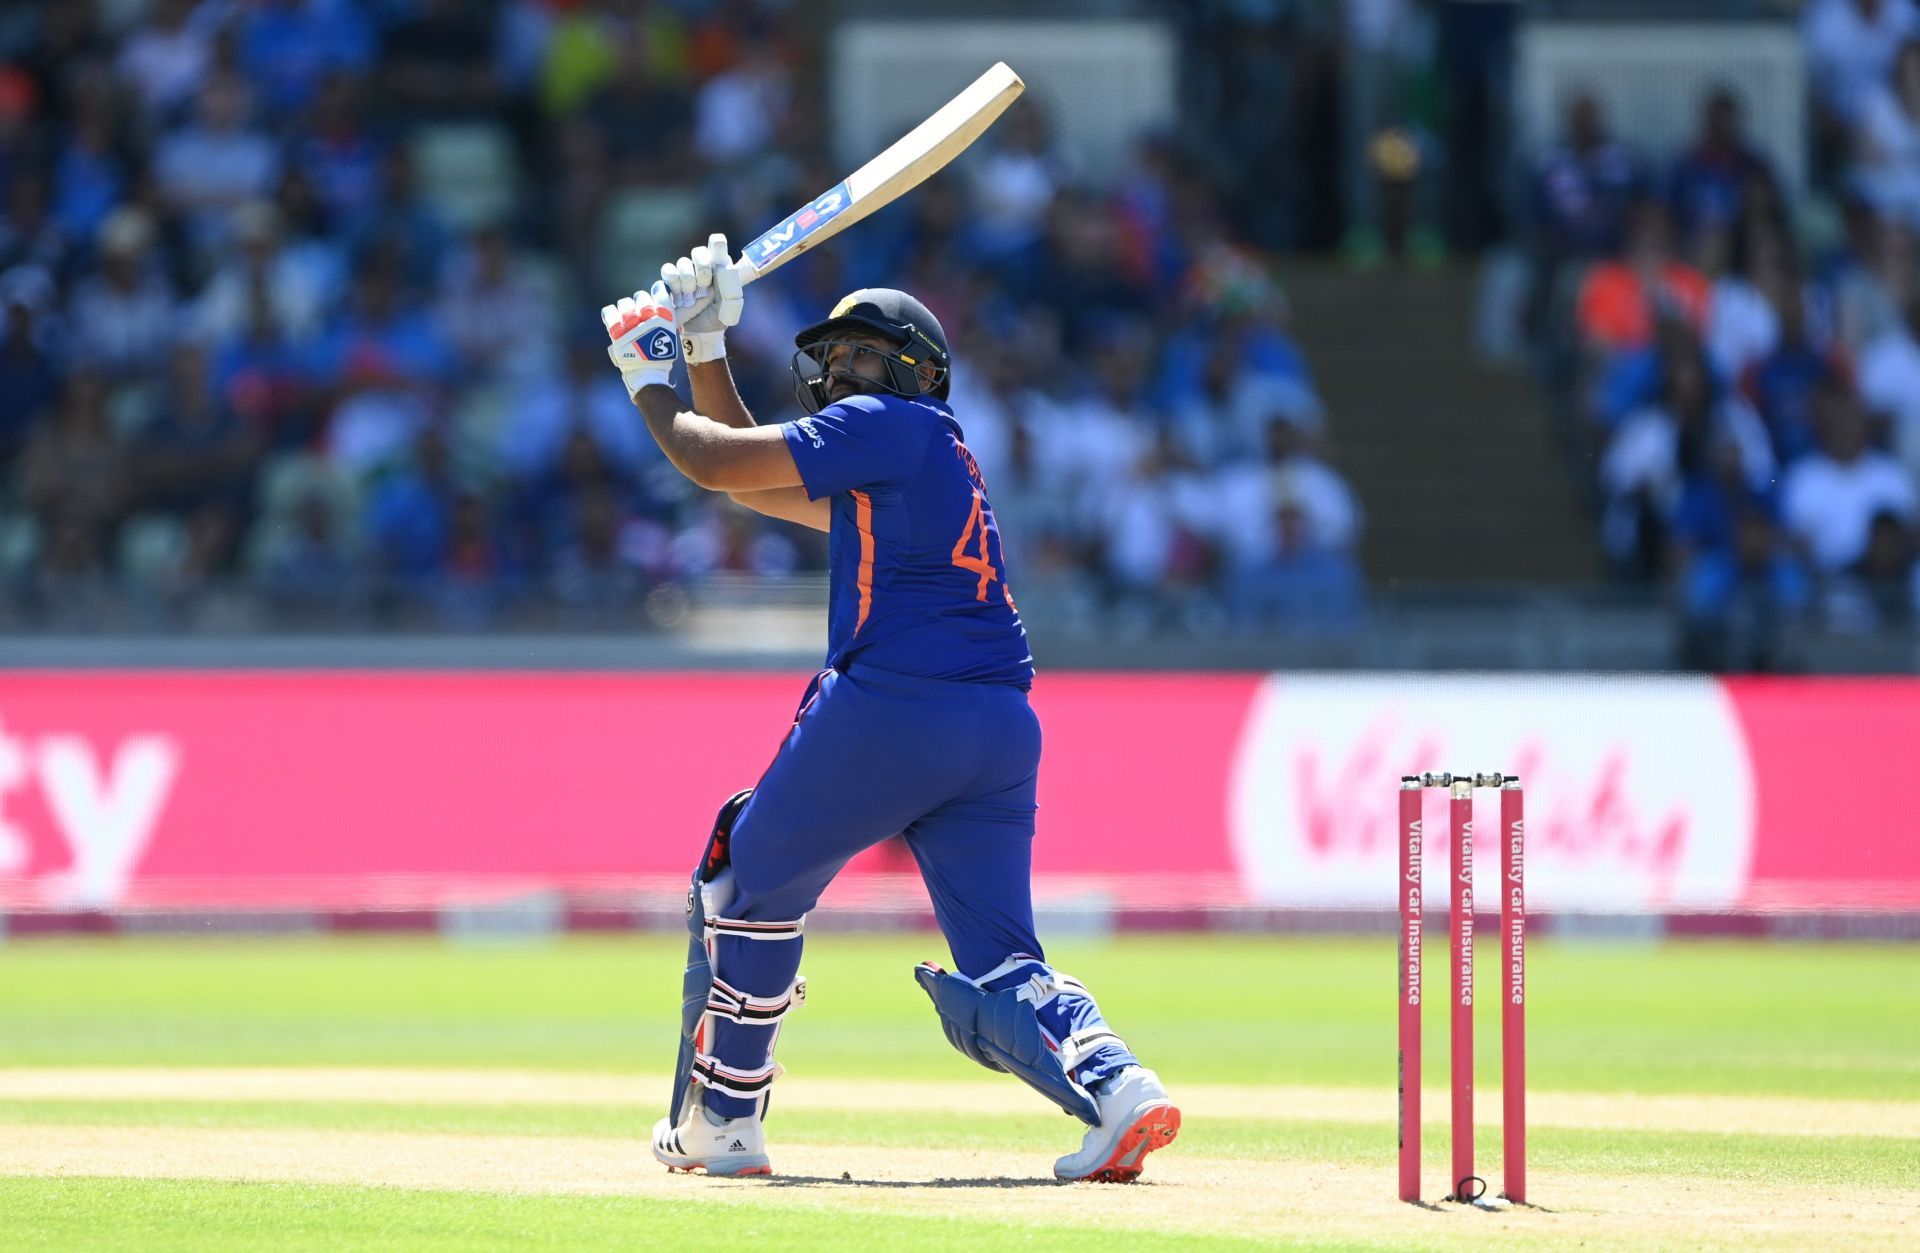 Rohit Sharma gave Team India a flying start in the company of Rishabh Pant